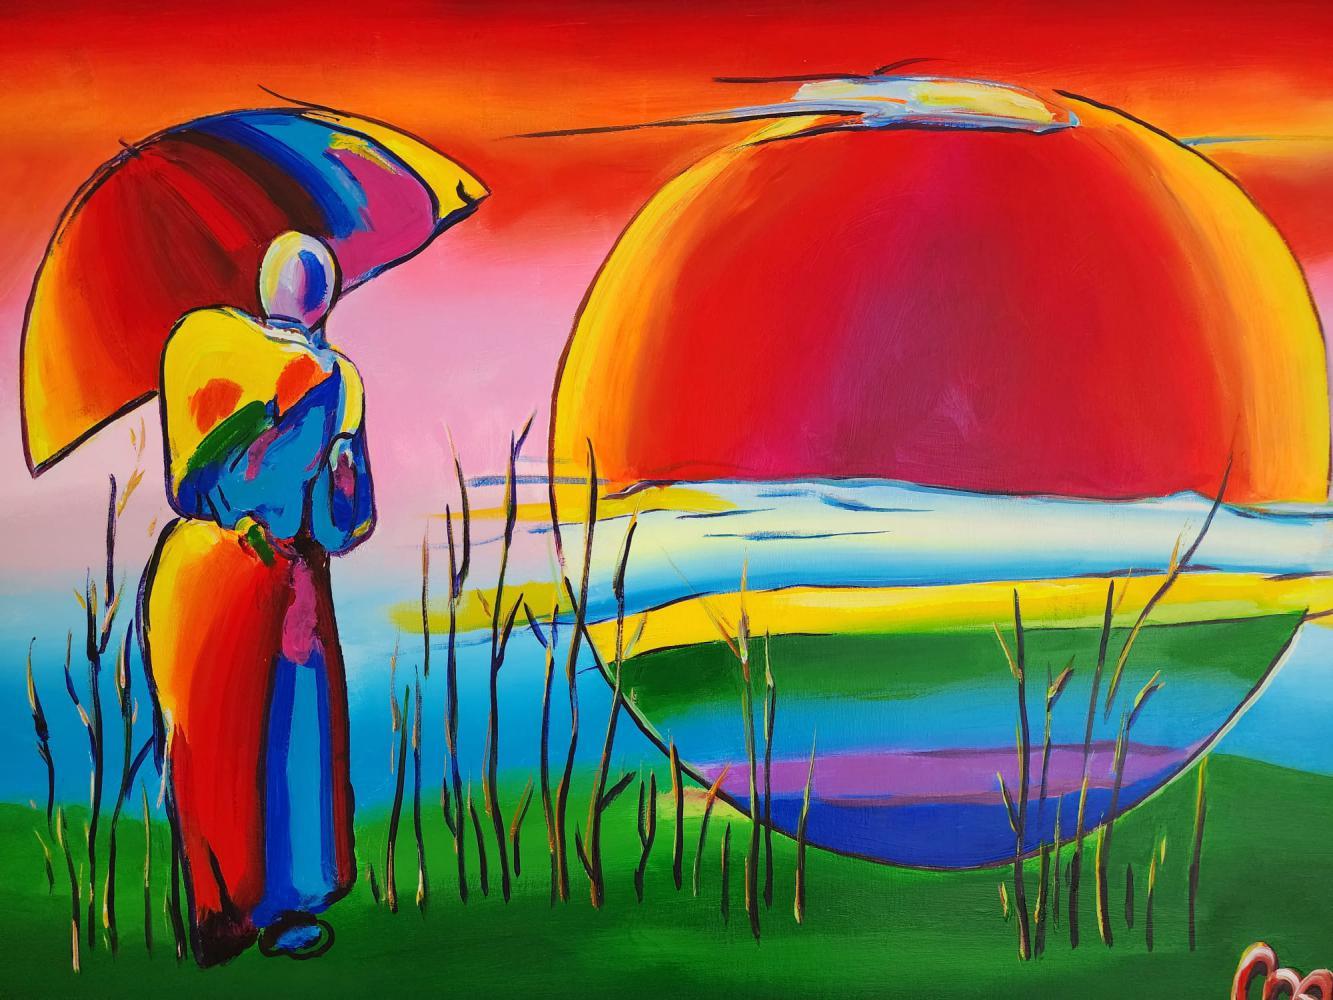 New Moon Ver III - Painting by Peter Max